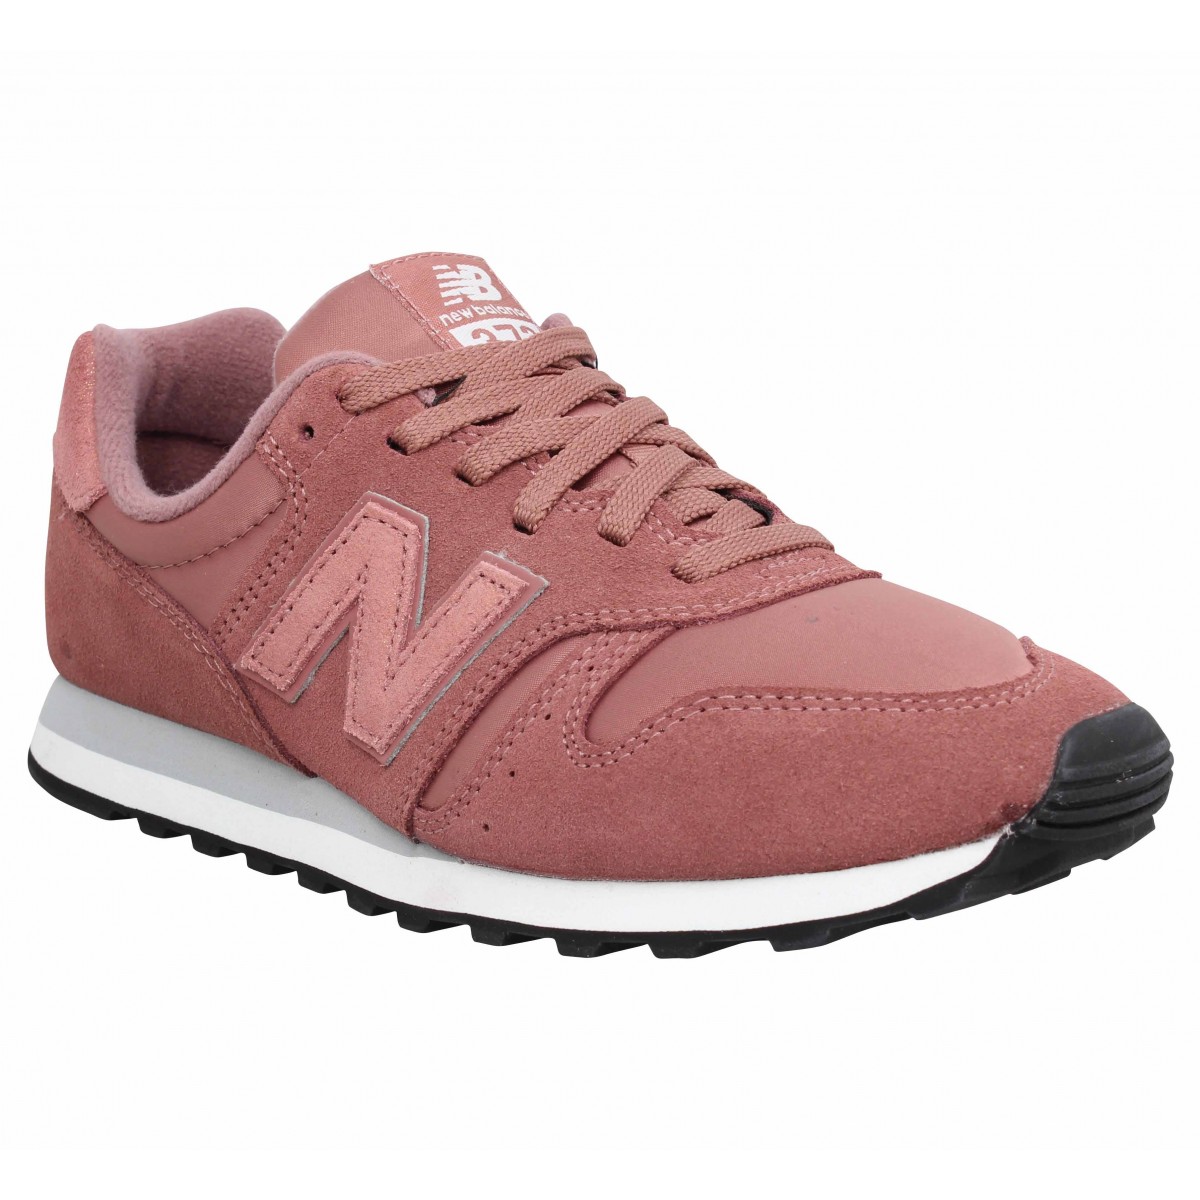 Chaussures New balance 373 velours femme rose femme | Fanny chaussures